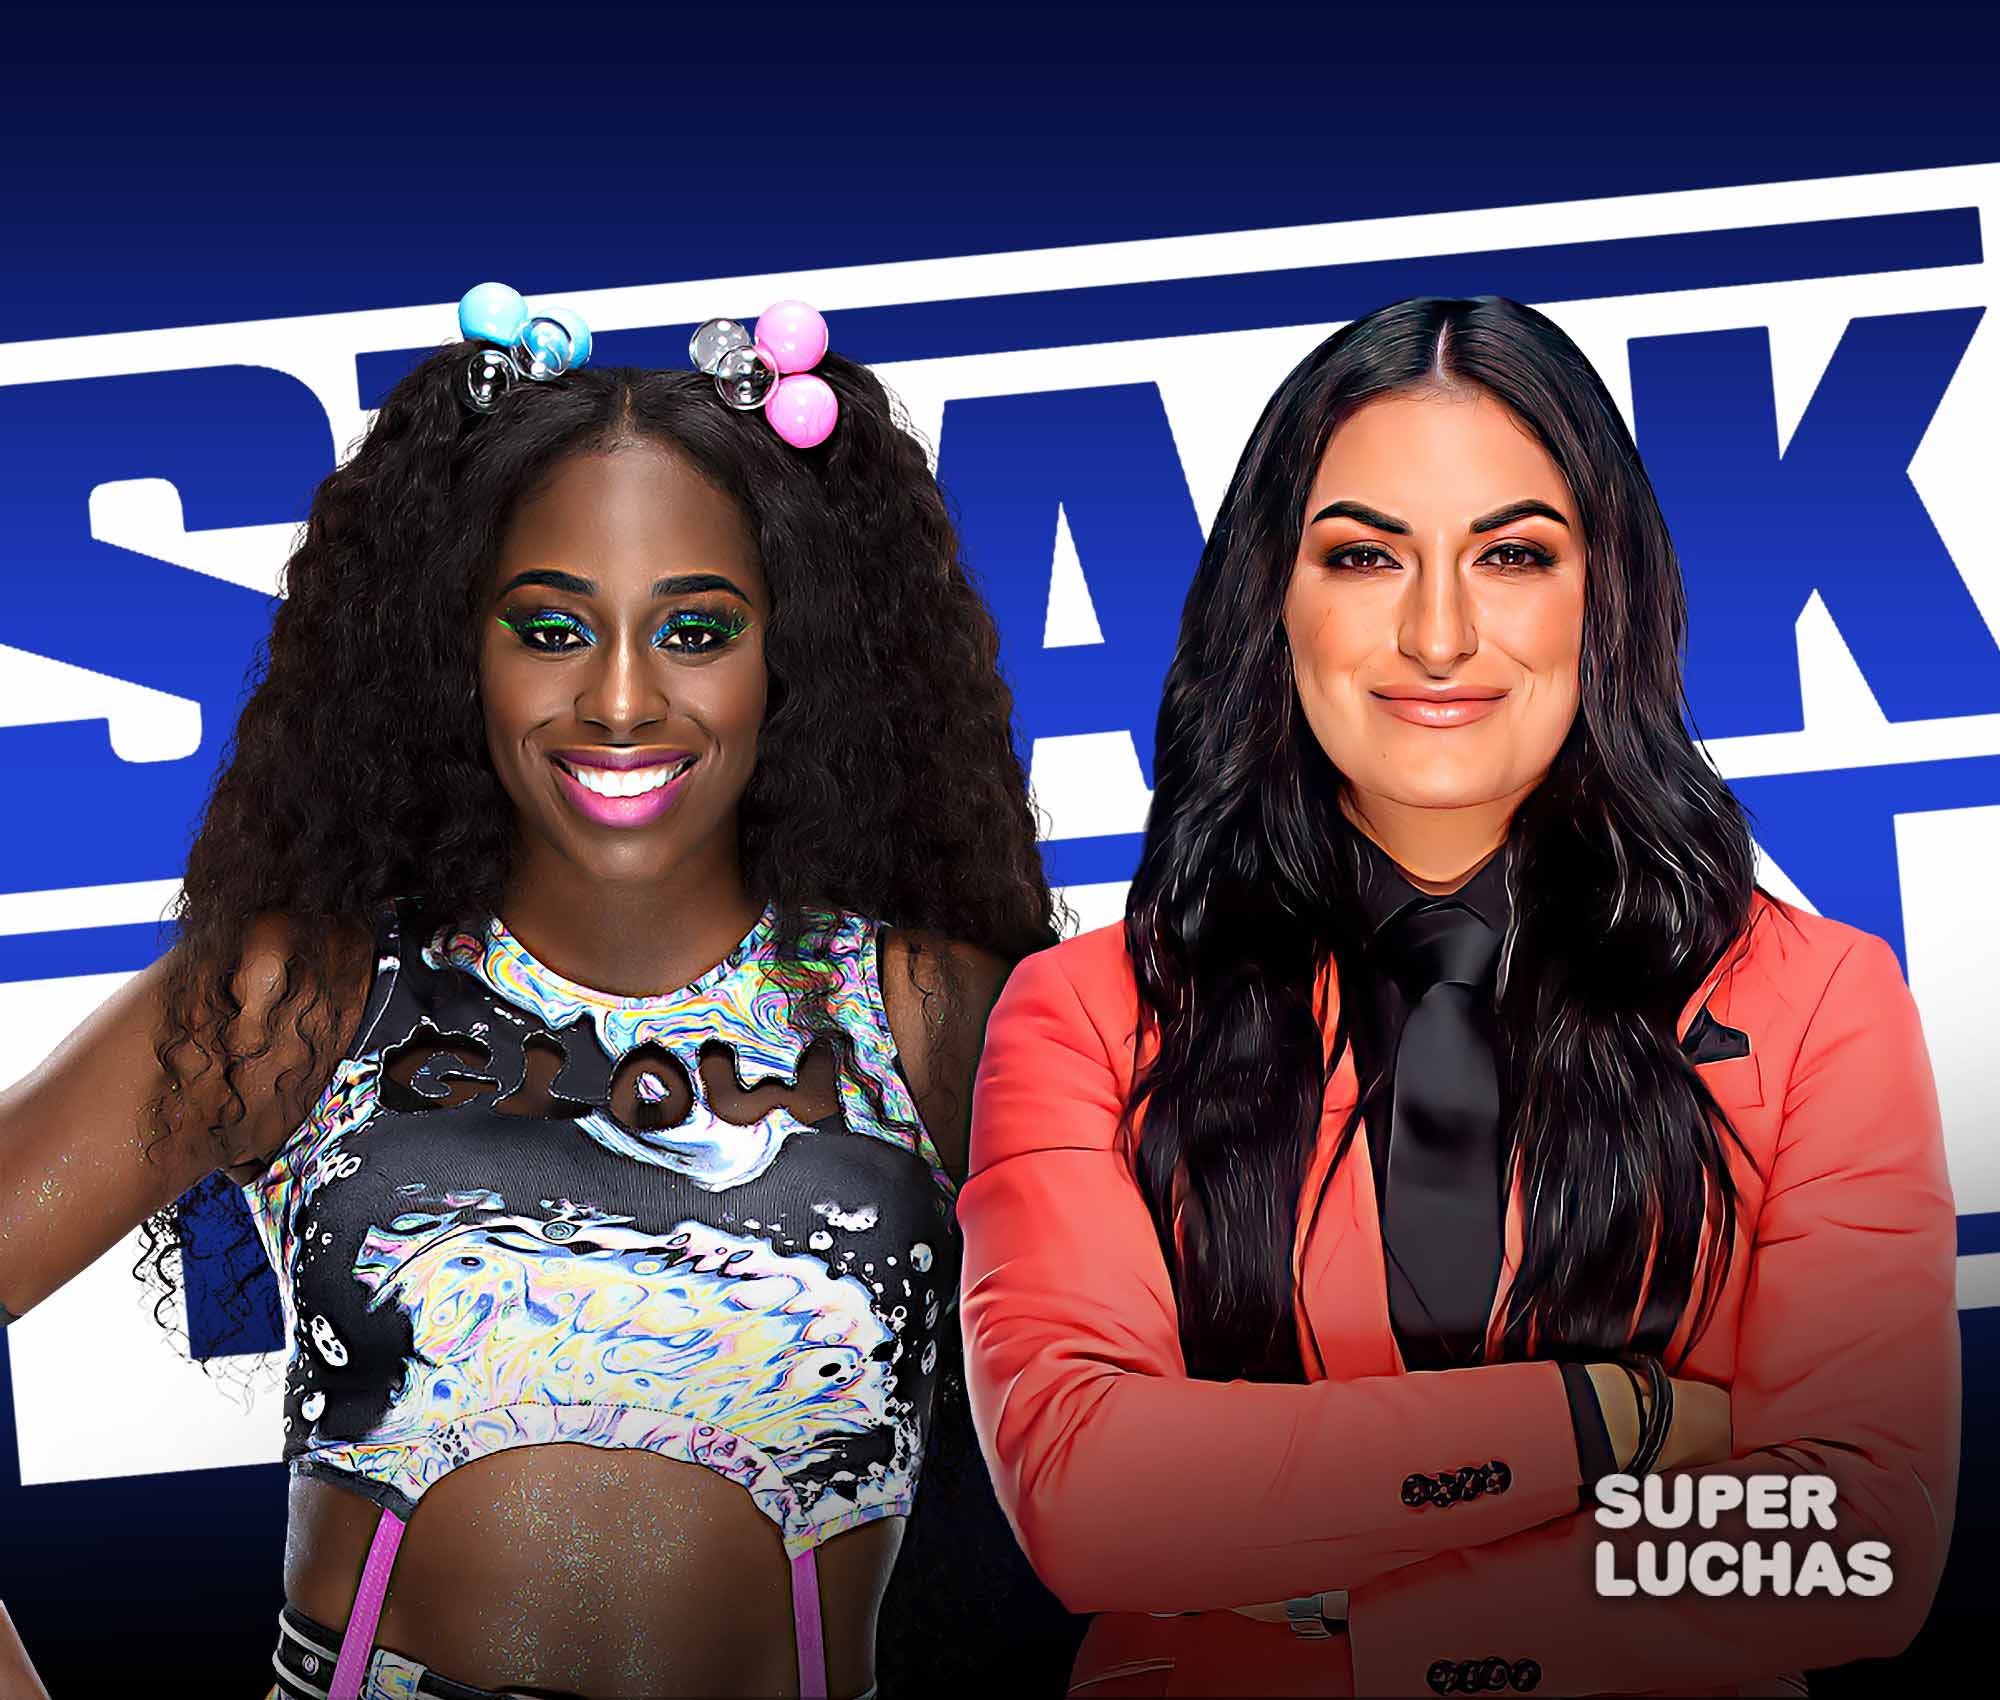 Coverage and results WWE SmackDown January 28, 2022